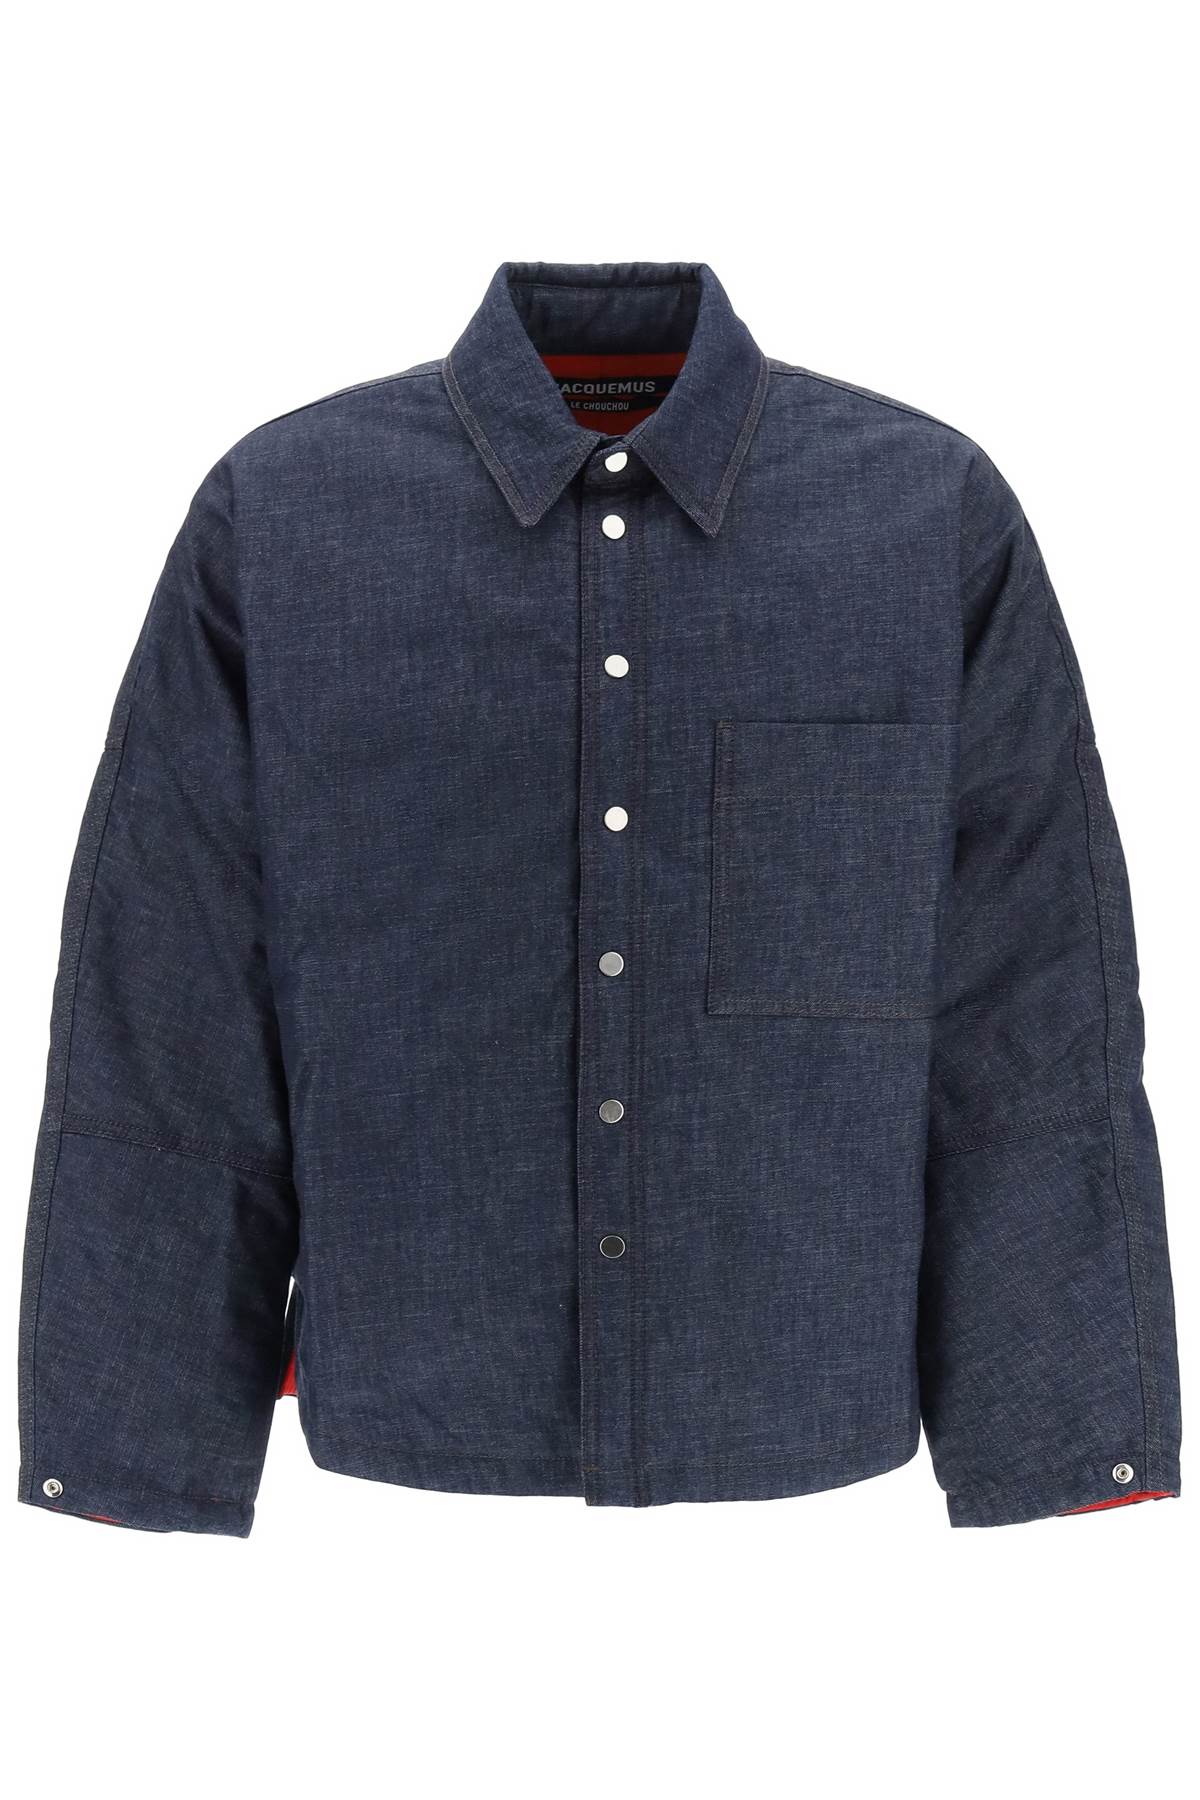 Shop Jacquemus Blue Overshirt From The Le Chouchou Collection For Men